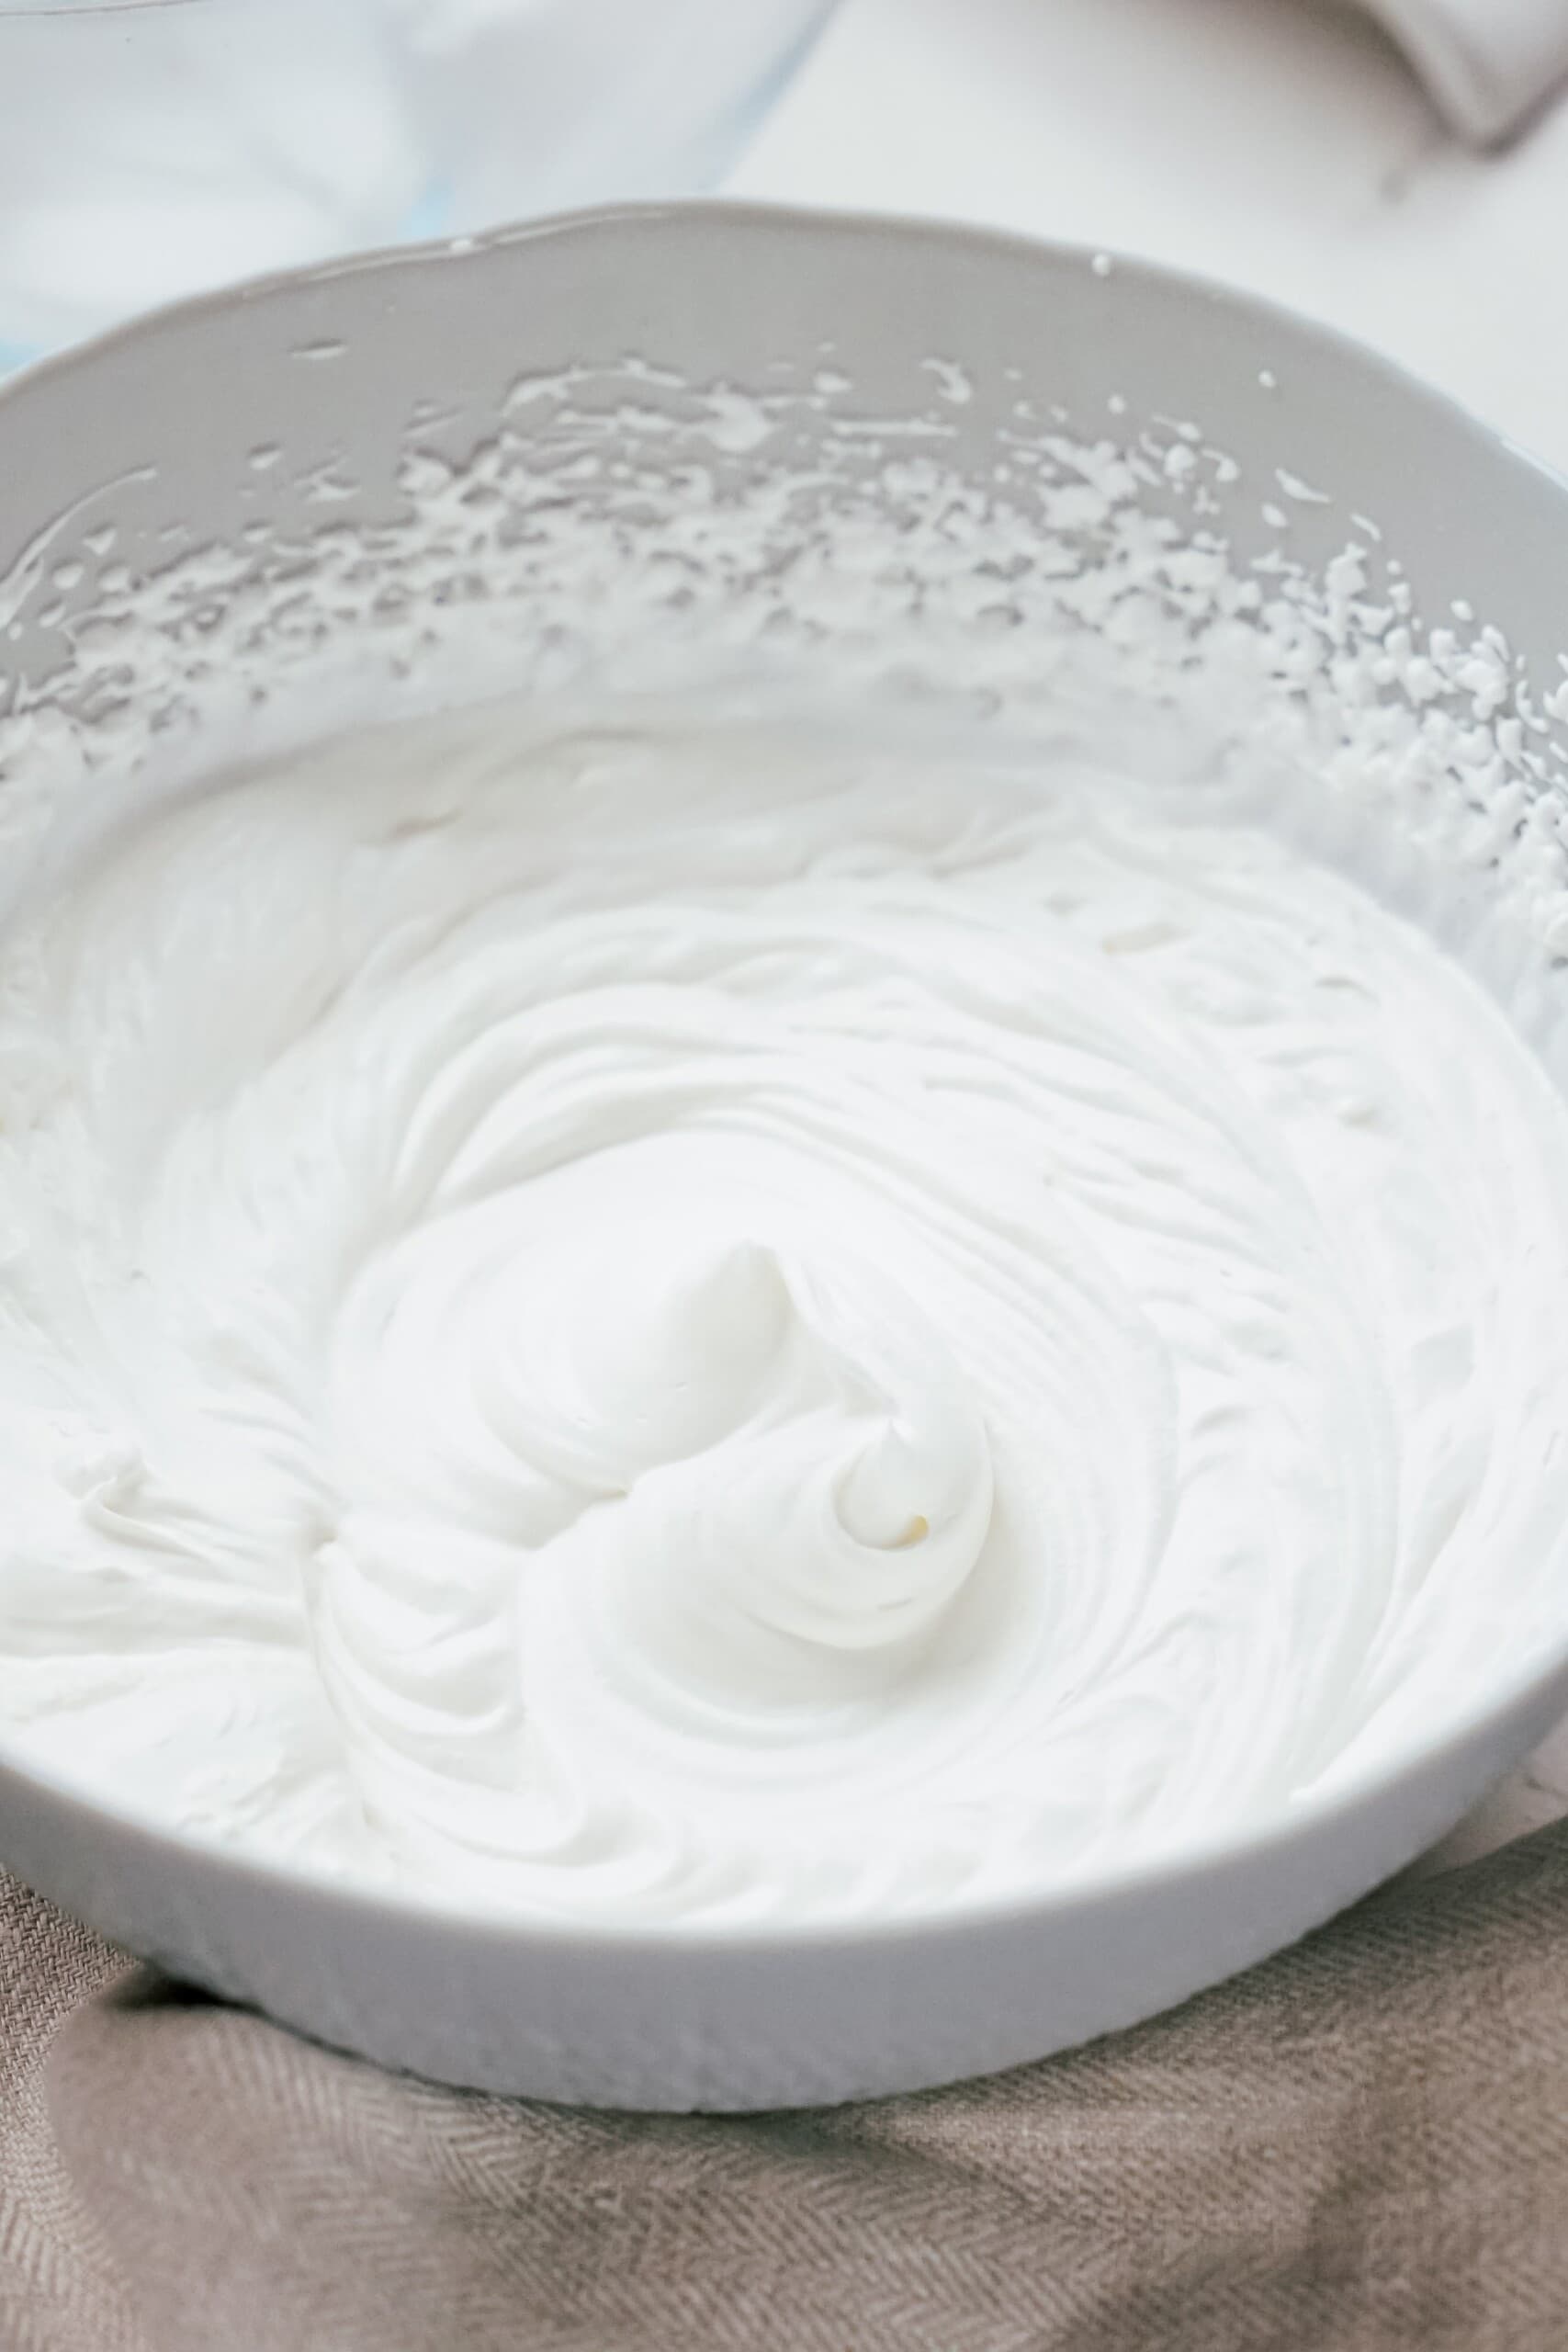 homemade whipped cream in a glass mixing bowl